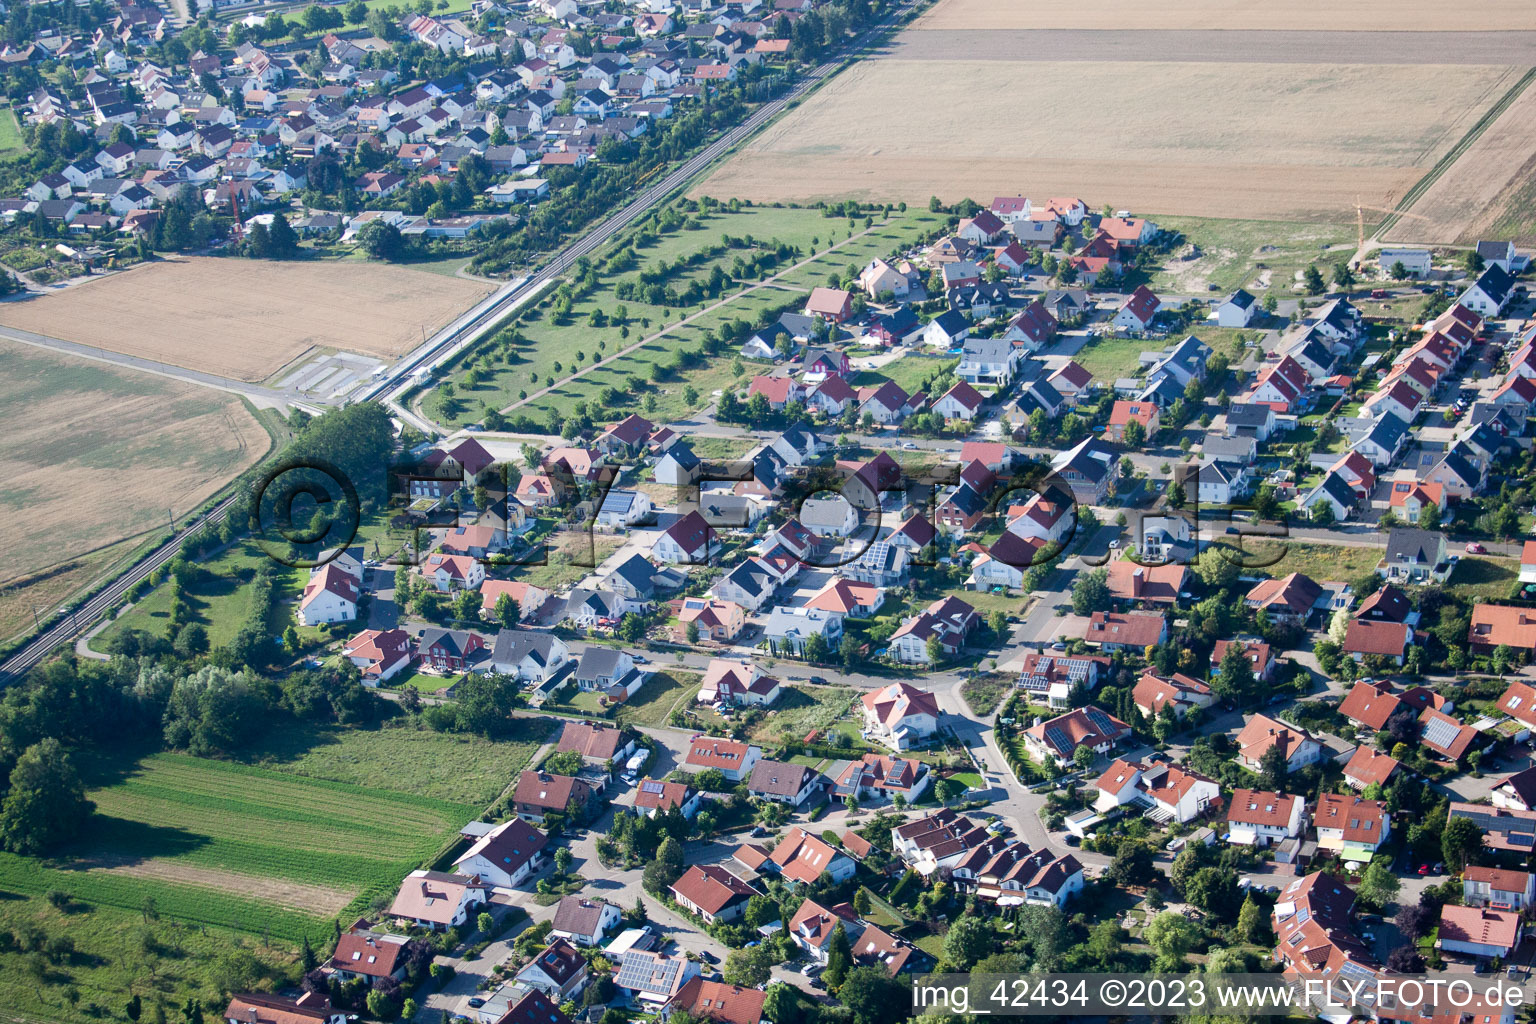 Oblique view of New development area in Rheinzabern in the state Rhineland-Palatinate, Germany